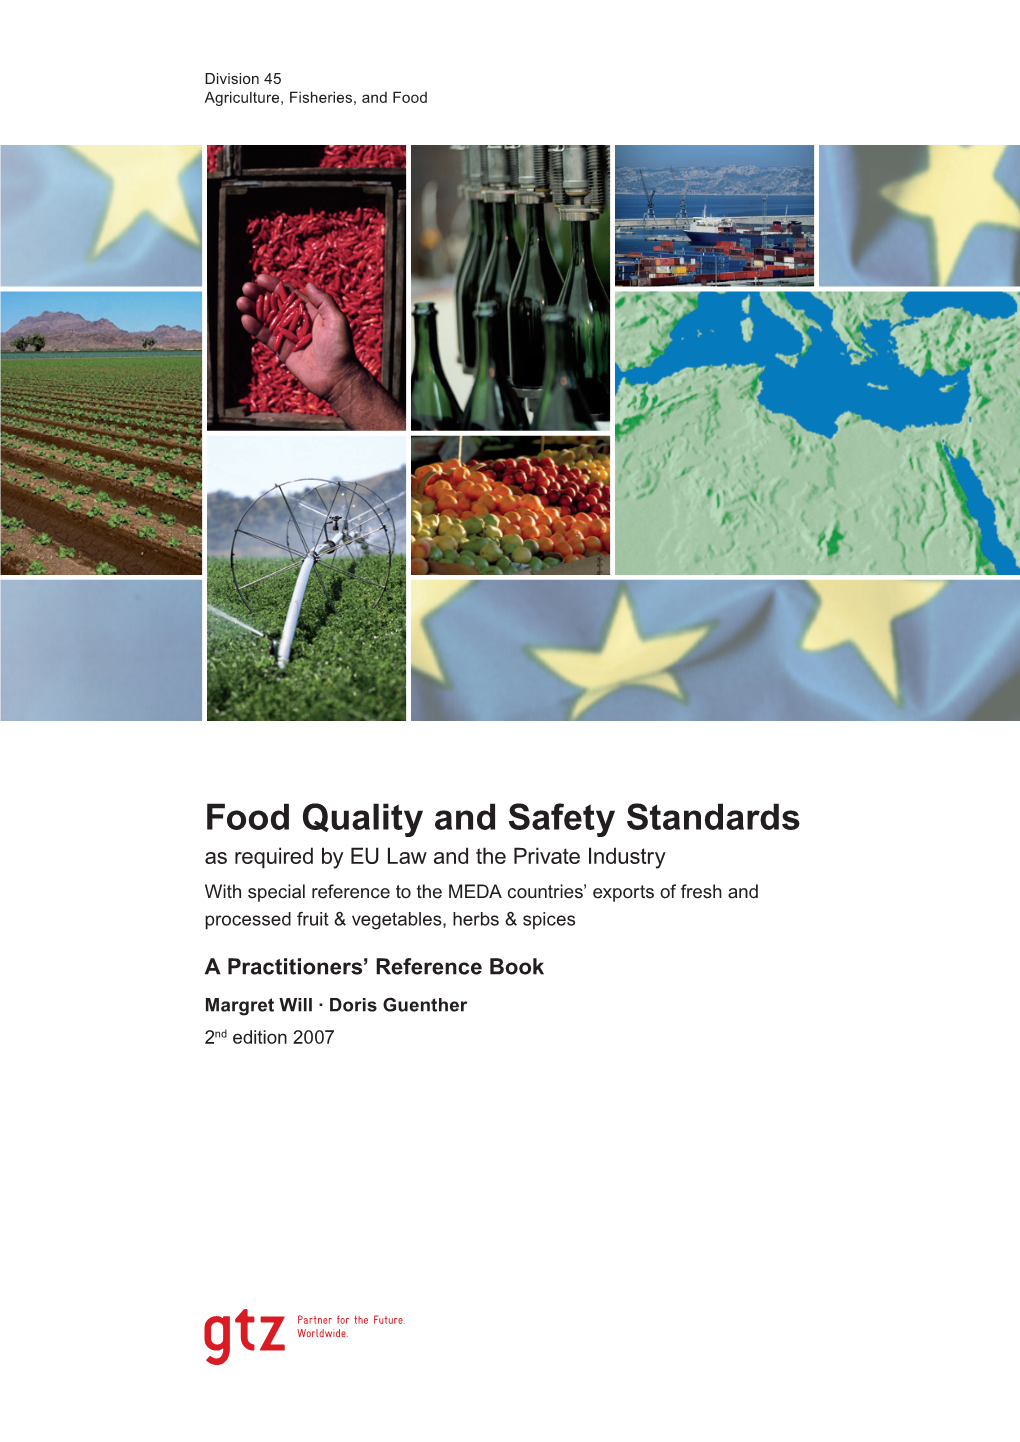 Food Quality and Safety Standards